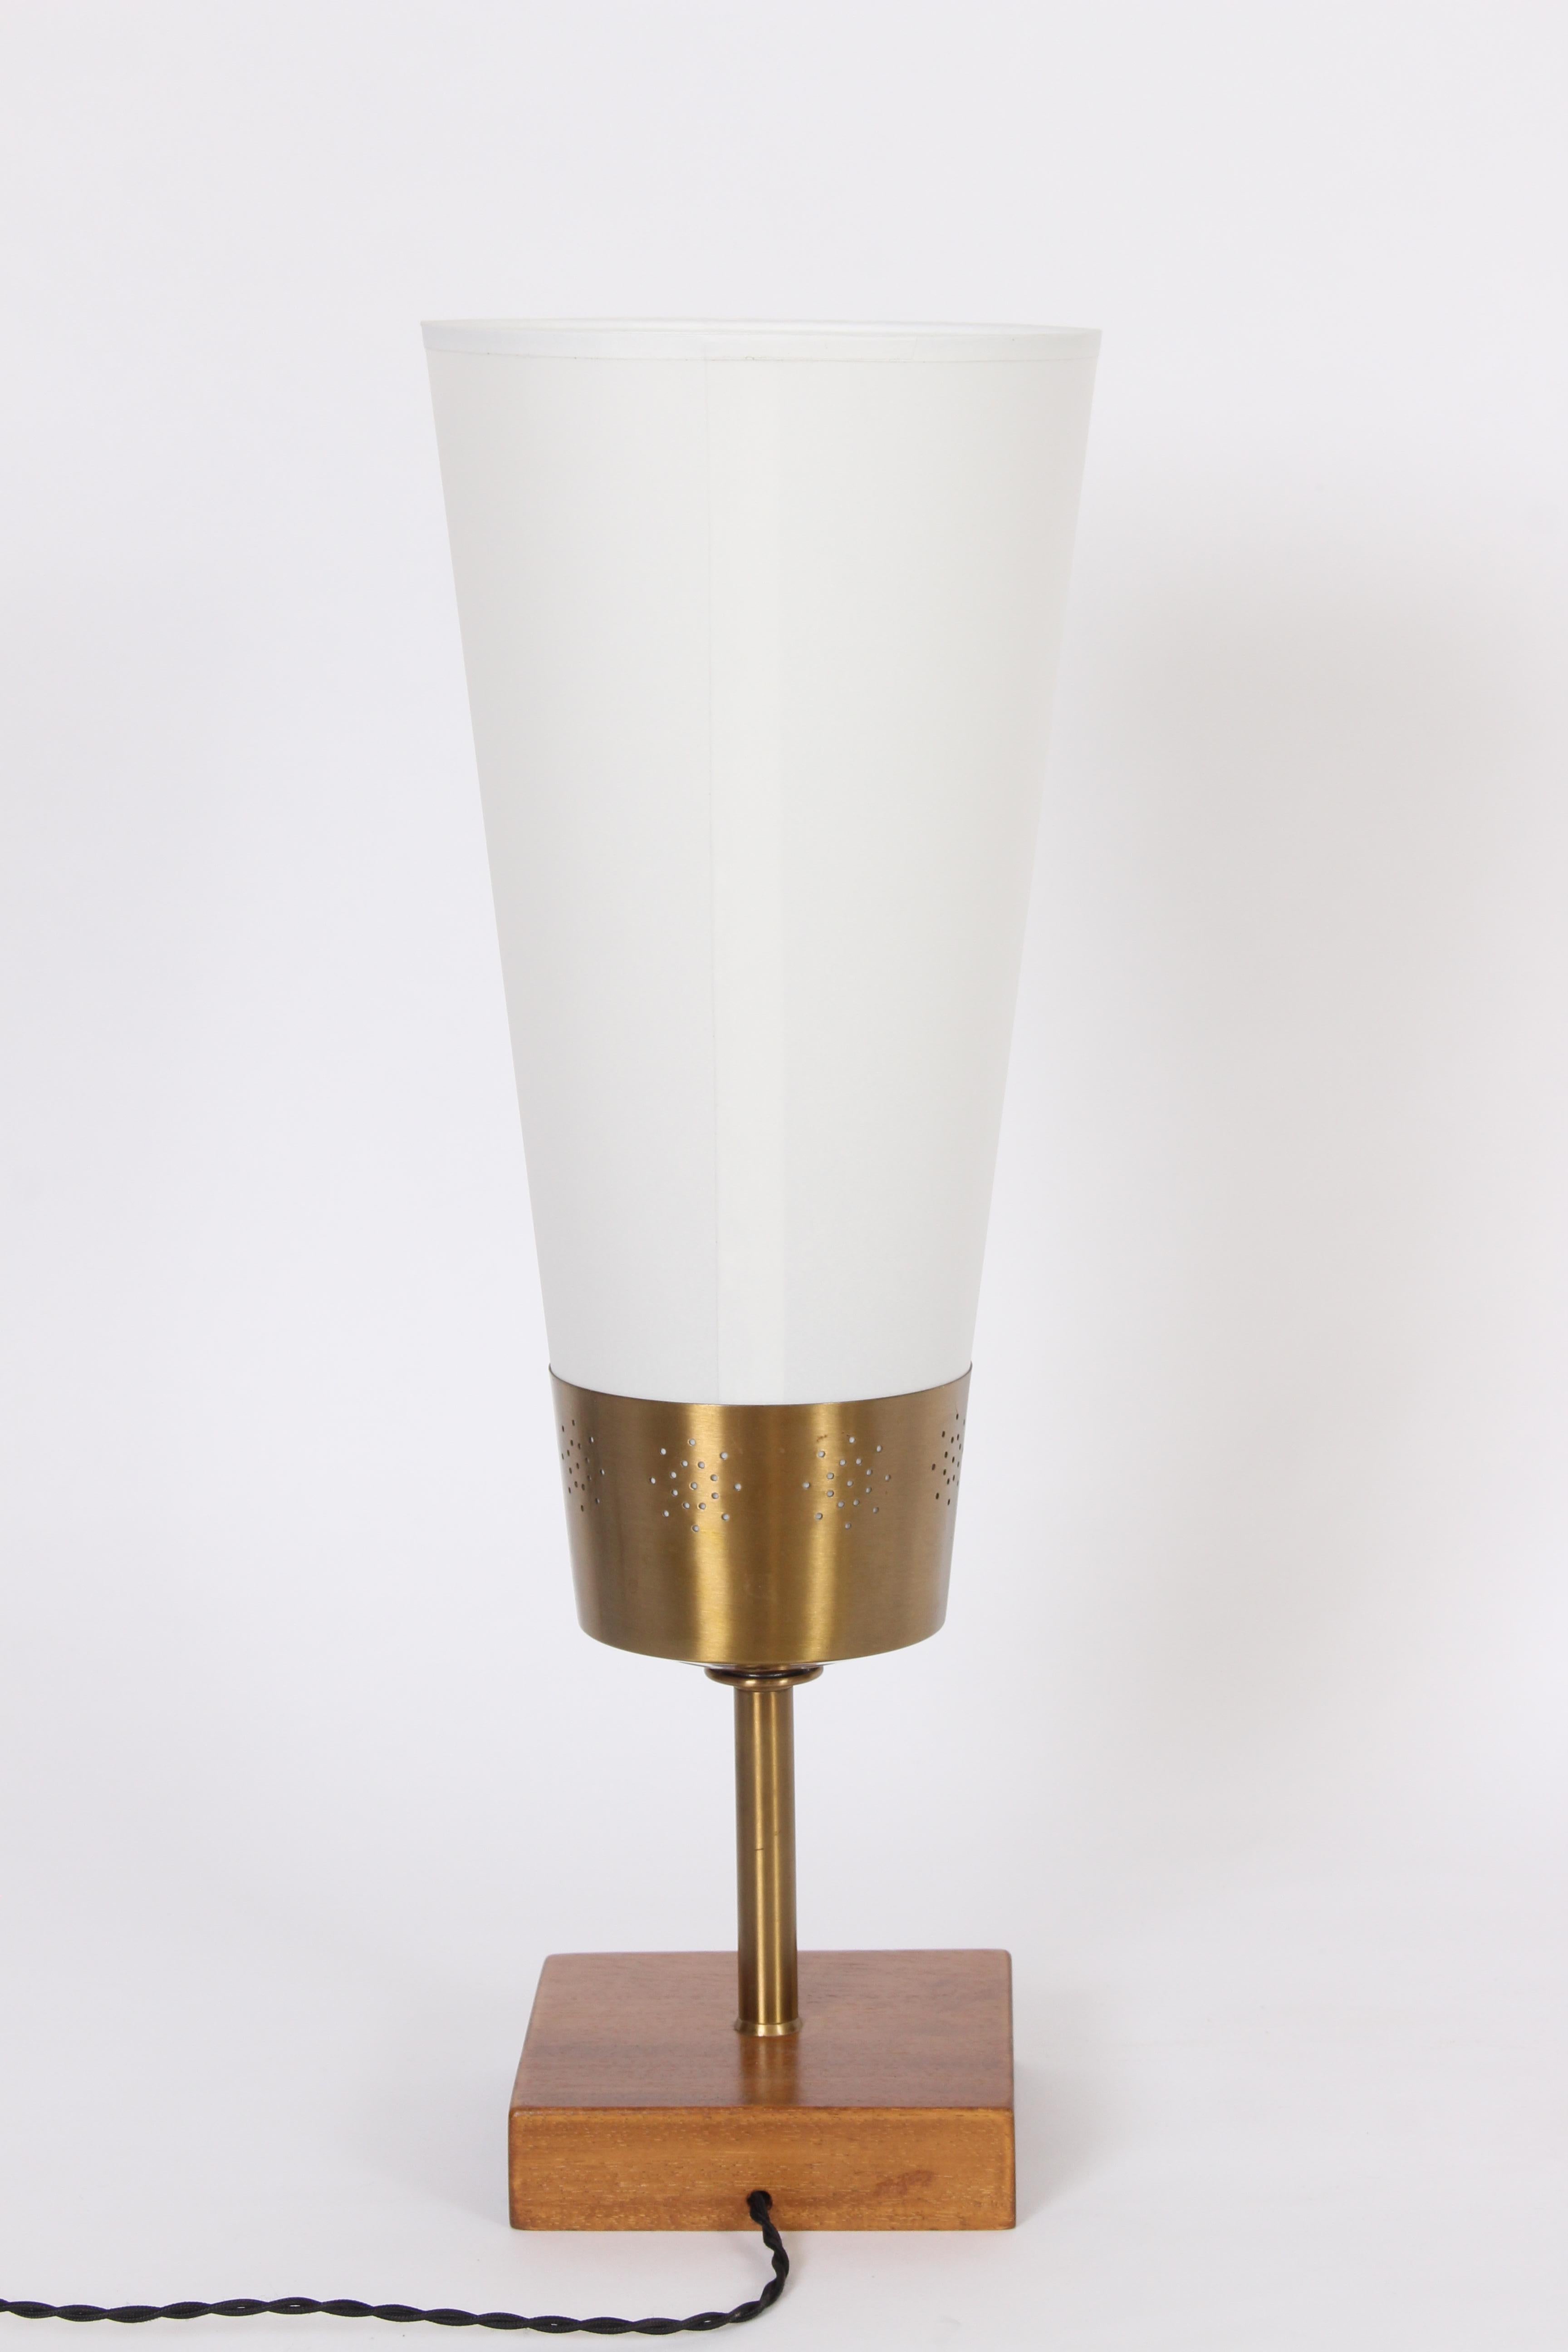 American Yasha Heifetz Pierced Brass and Mahogany Table Lamp with White Cone Shade, 1940s